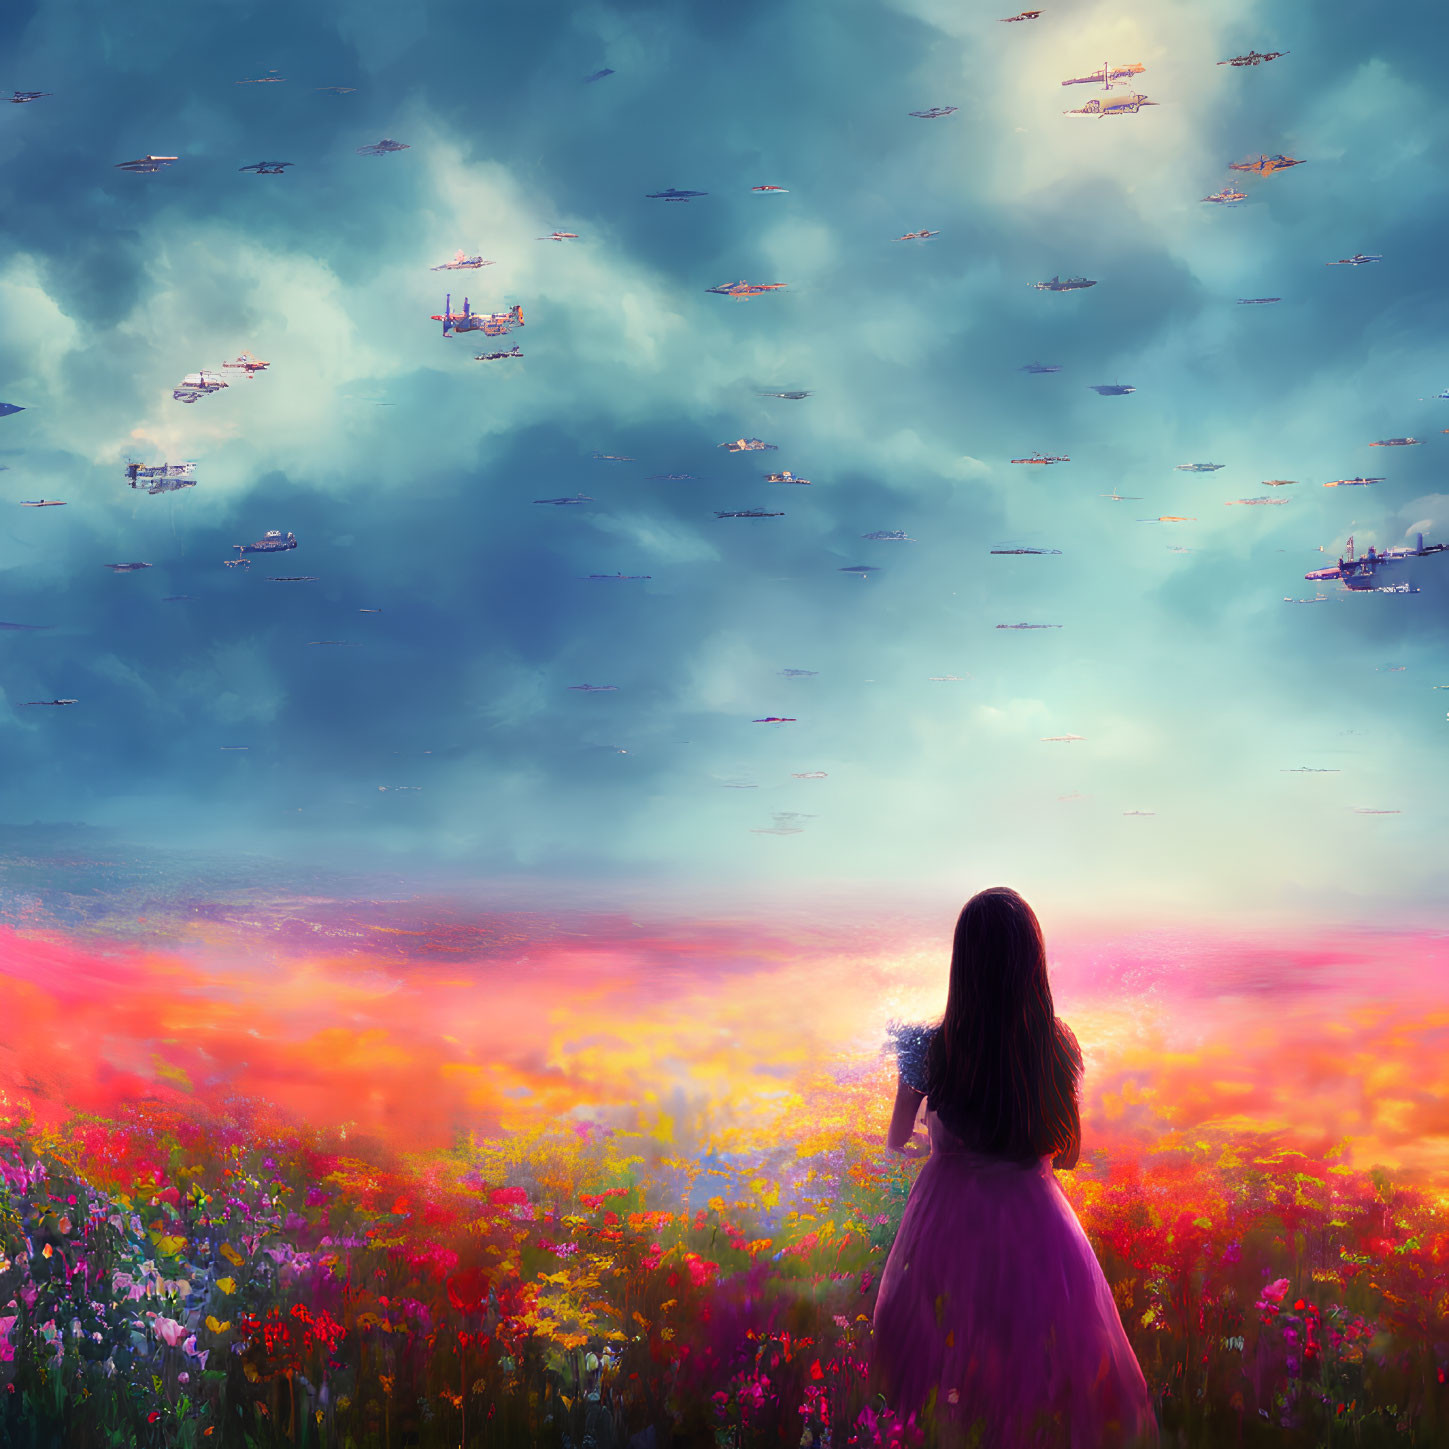 Girl in purple dress in vibrant flower field with dreamy clouds and floating ships